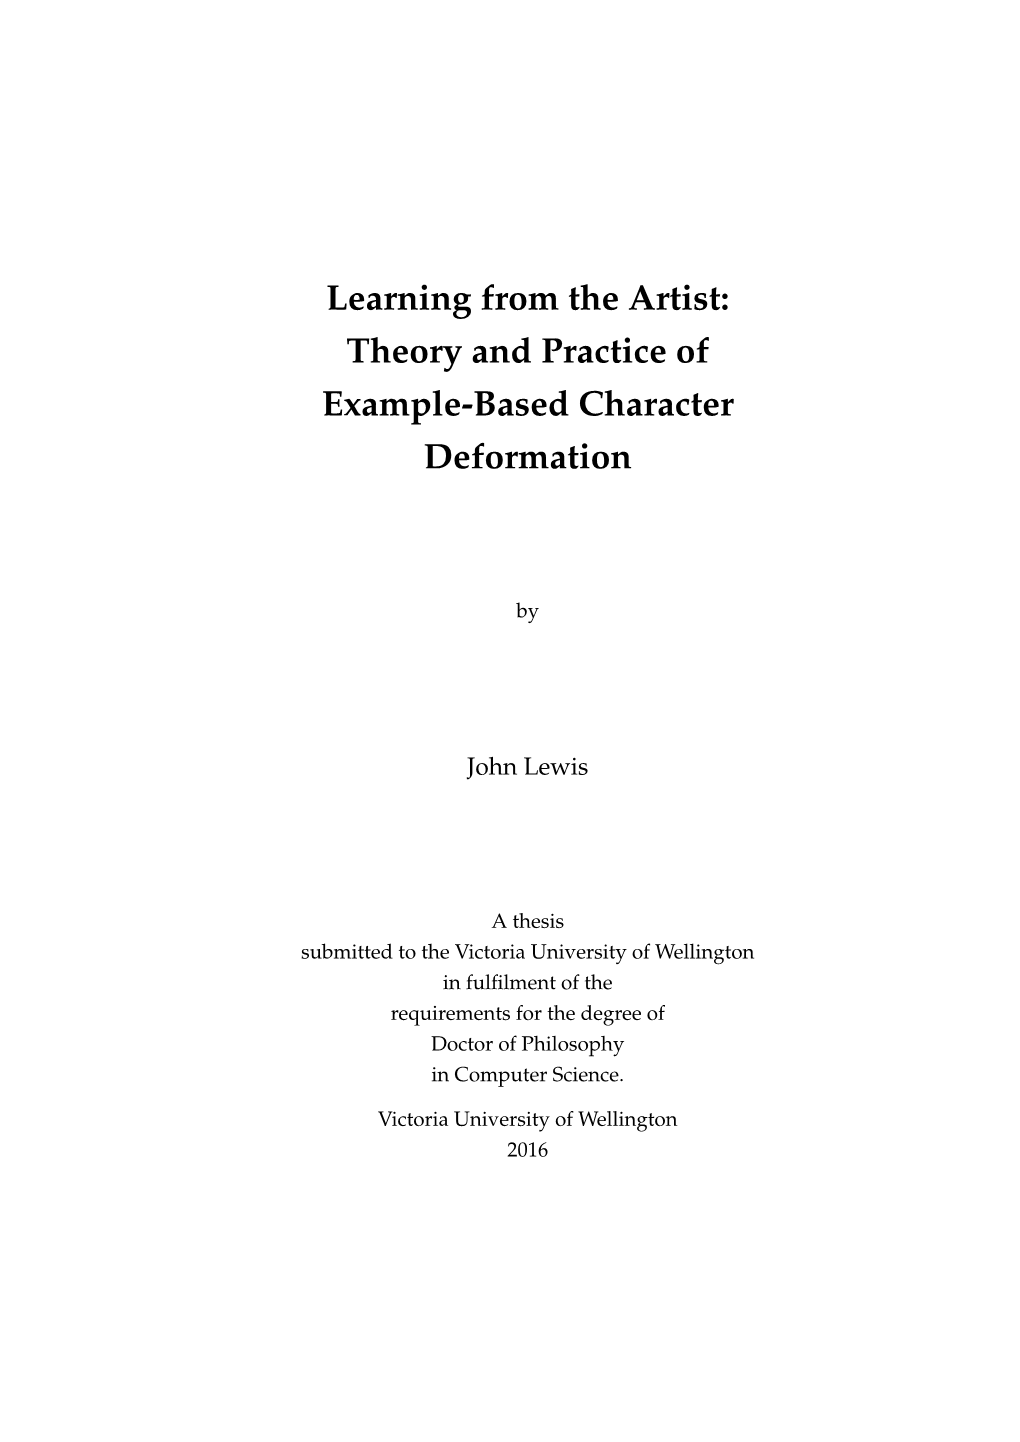 Learning from the Artist: Theory and Practice of Example-Based Character Deformation